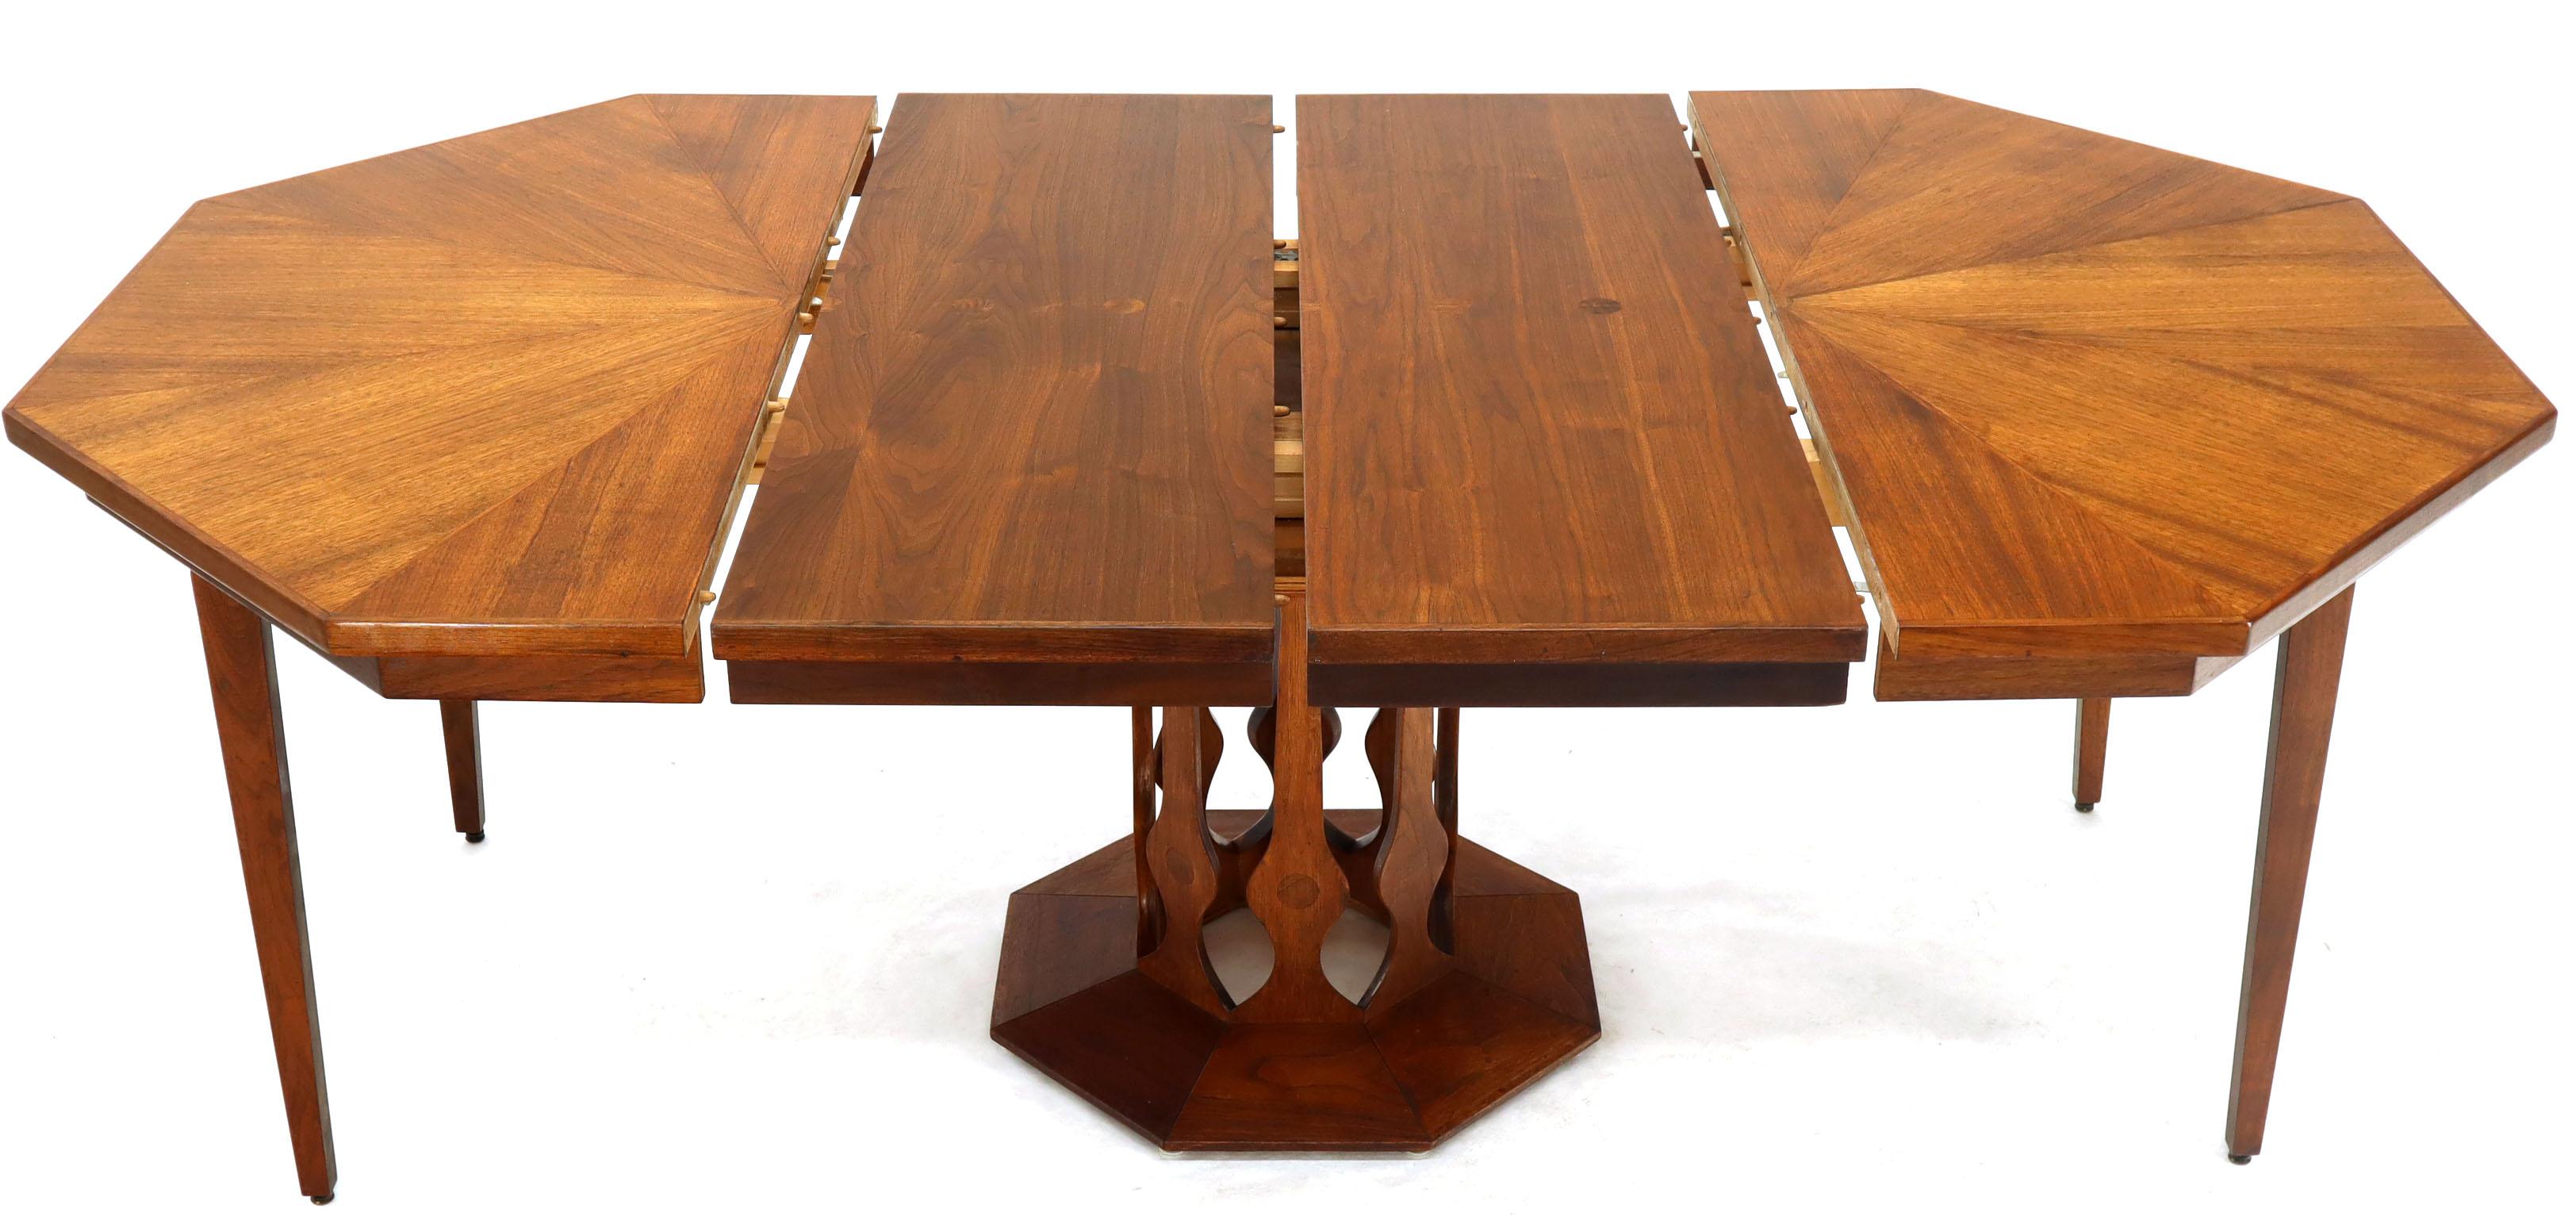 Oiled Walnut Octagonal Round Dining Table with Two Extension Leafs Probber Style 4